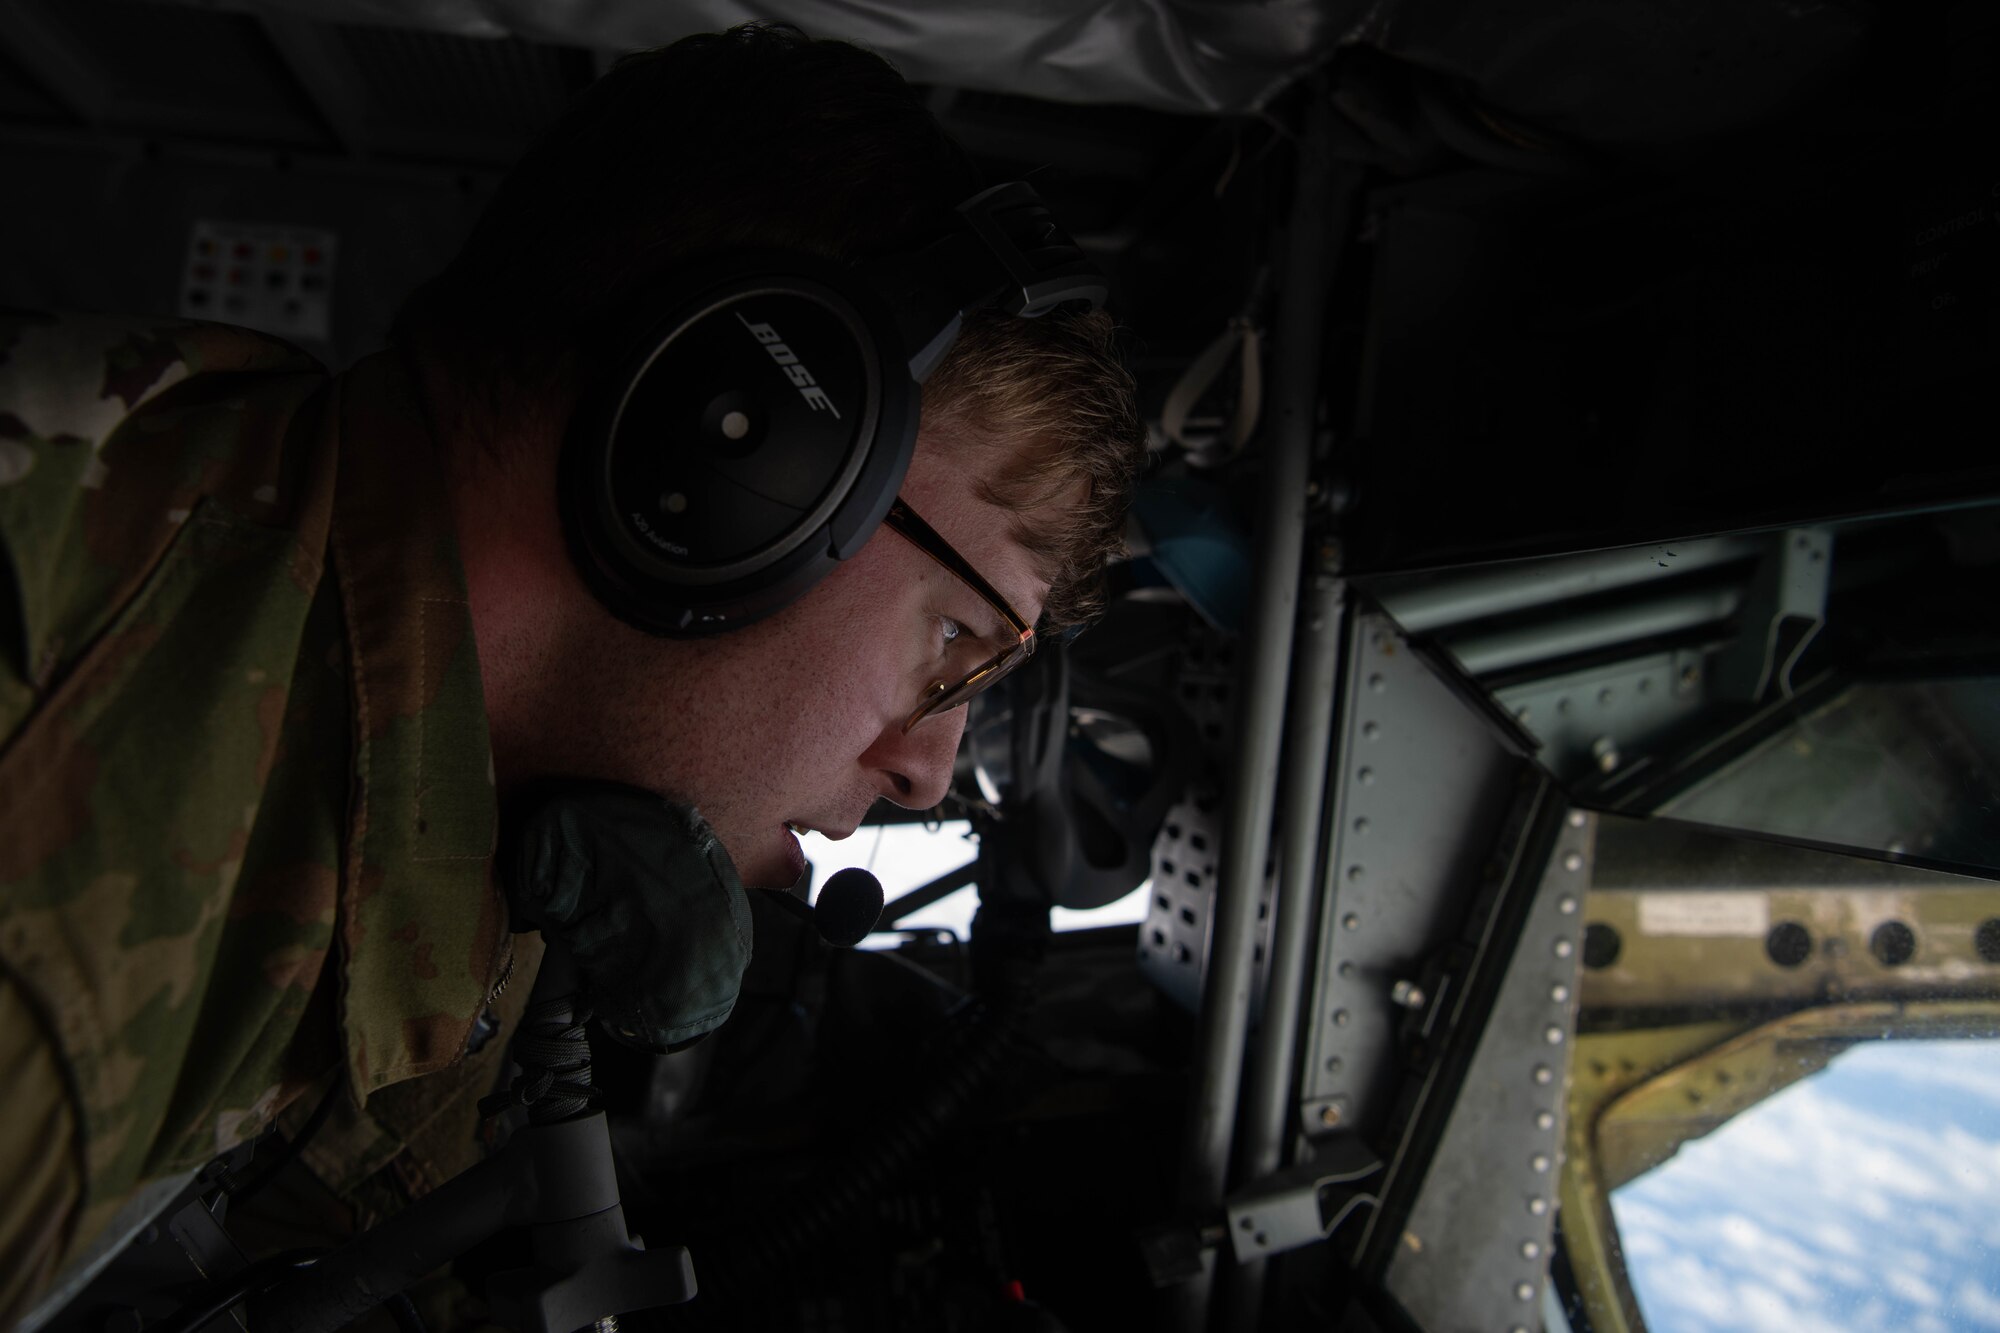 An Airman performs aerial refueling.